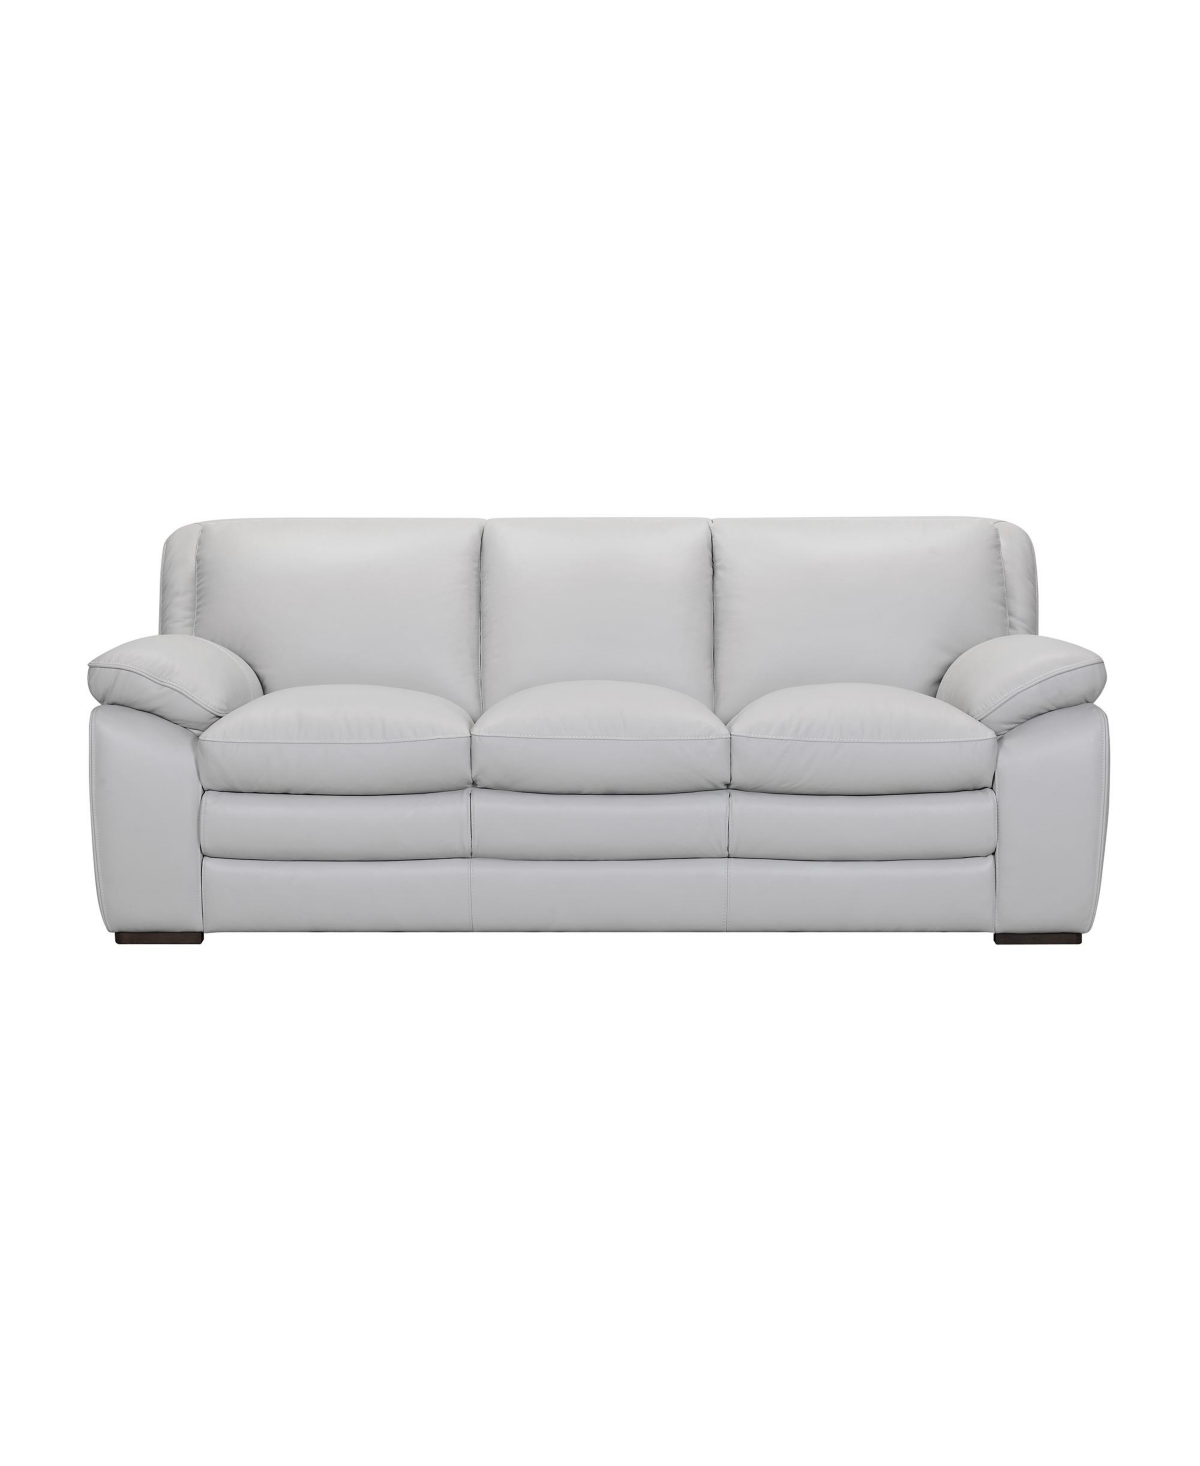 Armen Living Zanna 92" Genuine Leather With Wood Legs In Contemporary Sofa In Dove Gray